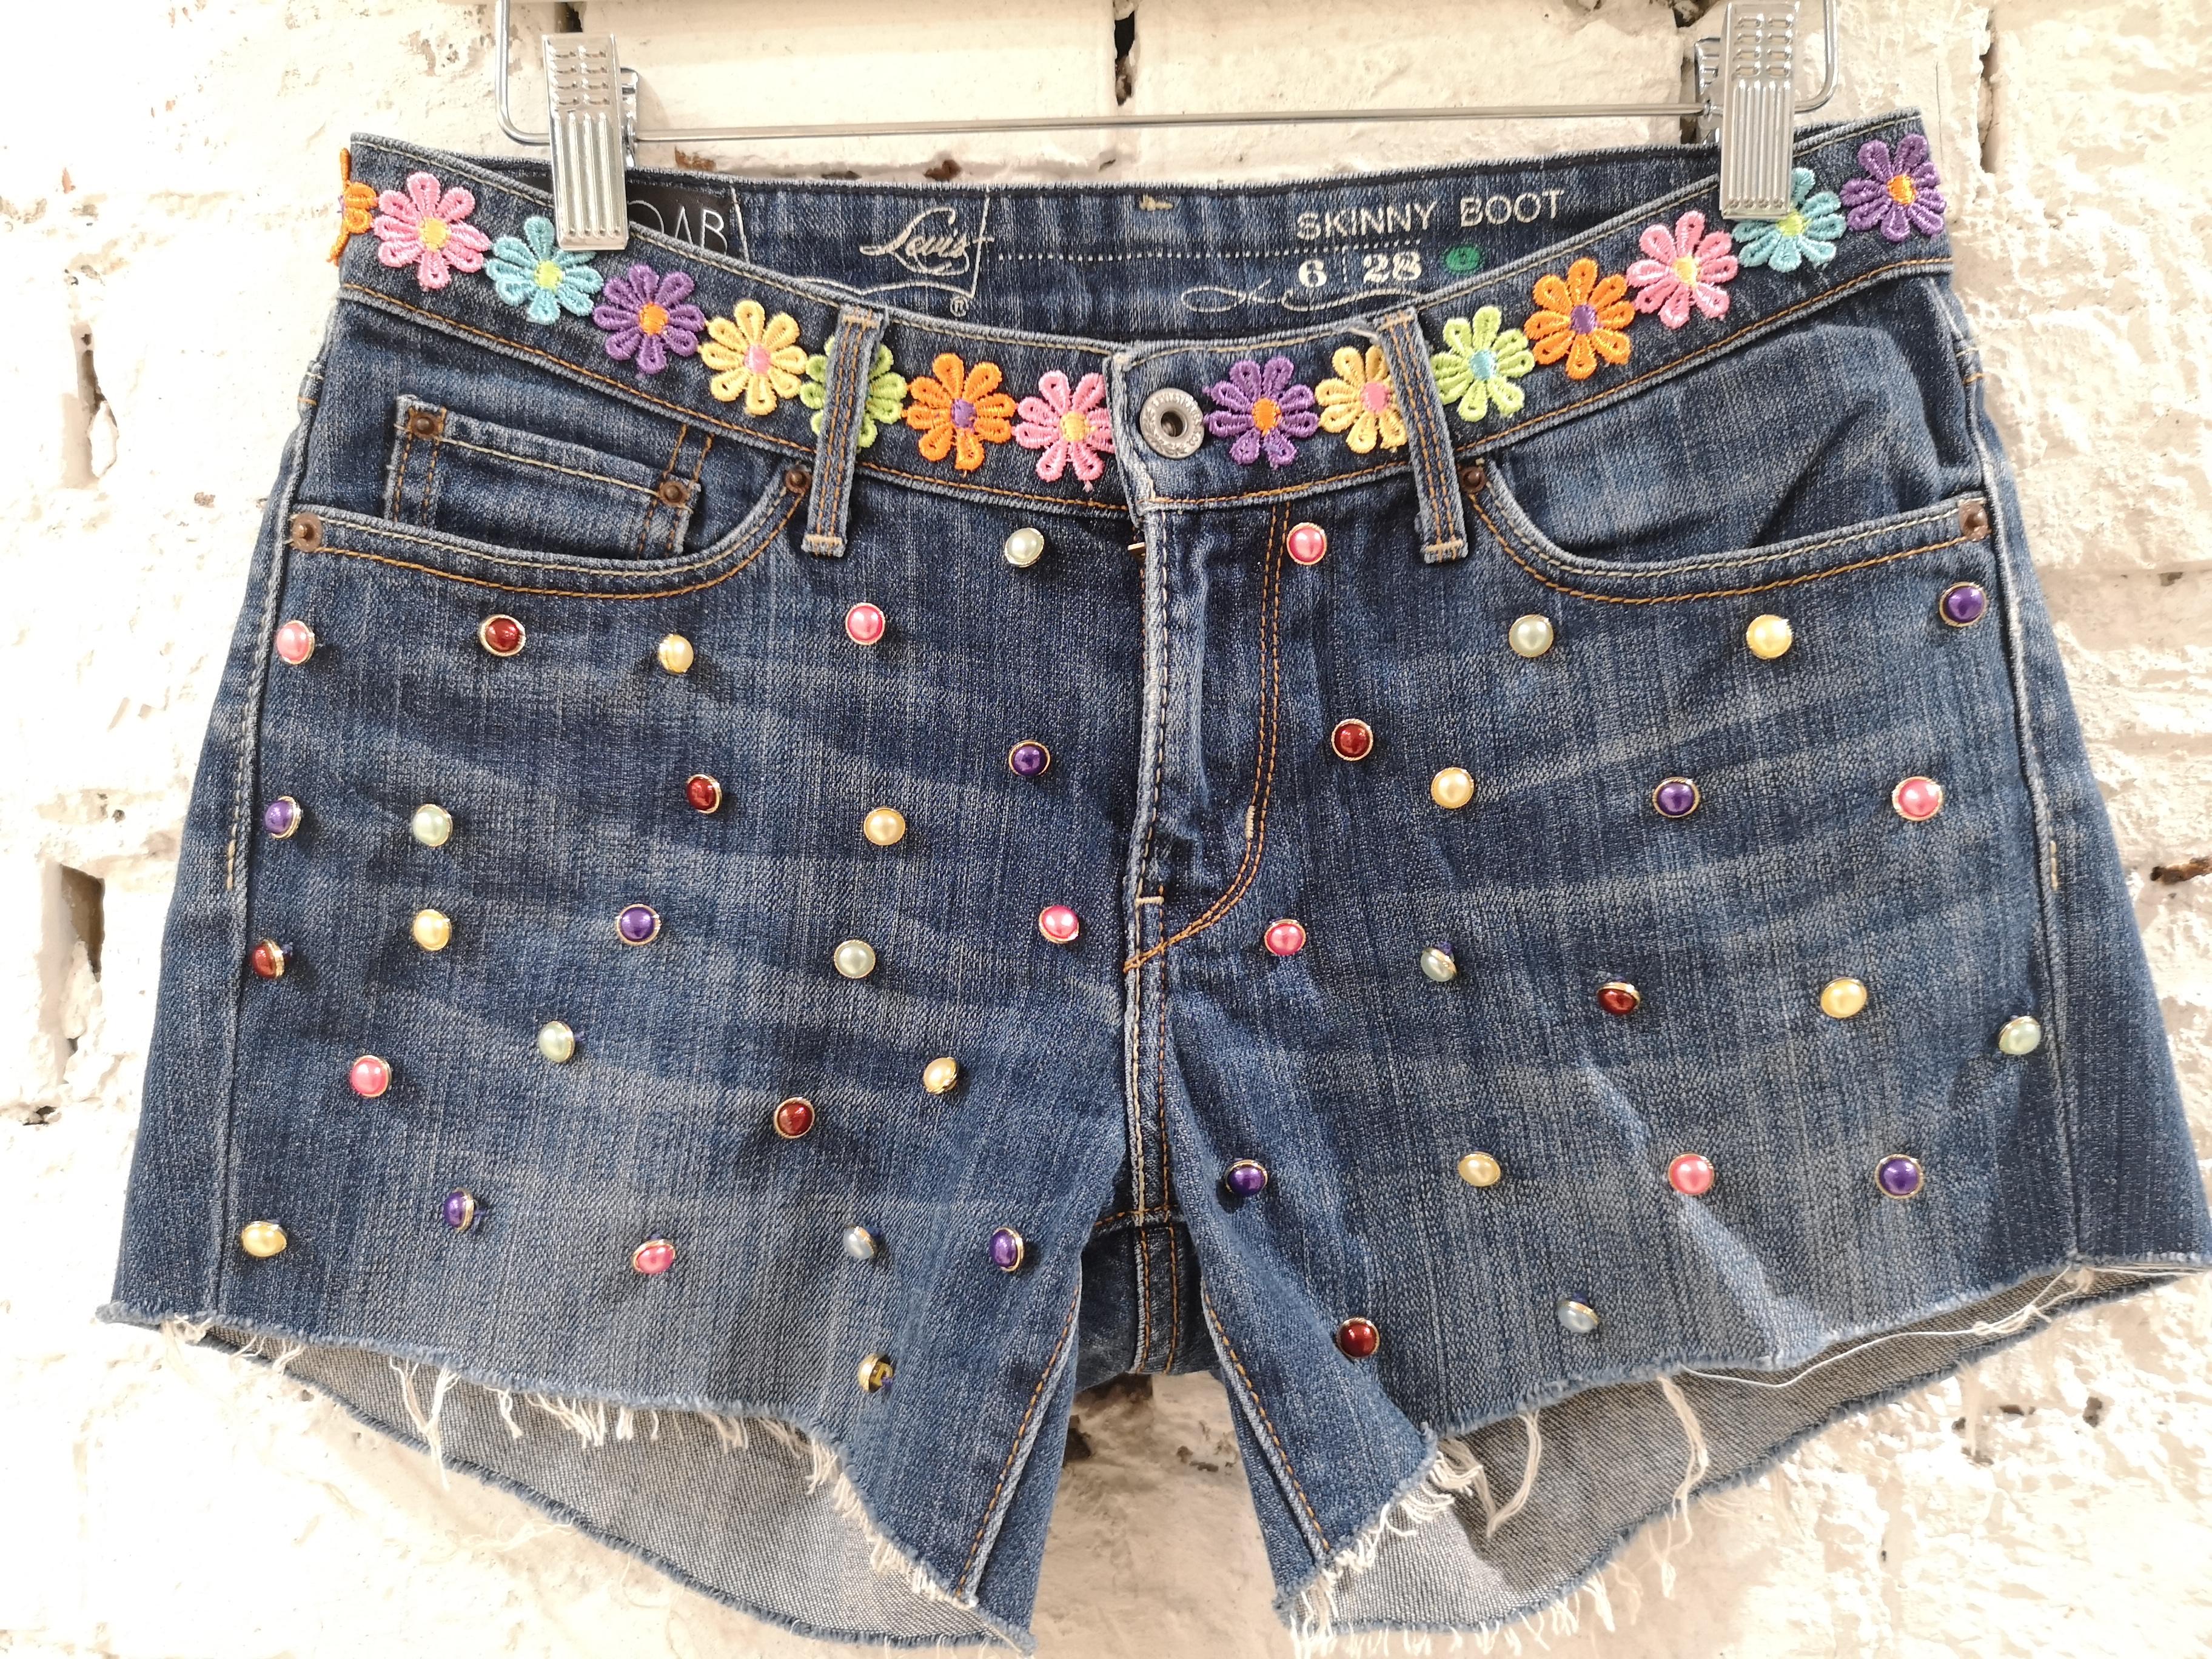 SOAB blue denim cotton flowers and beads shorts
totally handmade in italy
measurements:
lenght: 28 cm
waist 74 cm